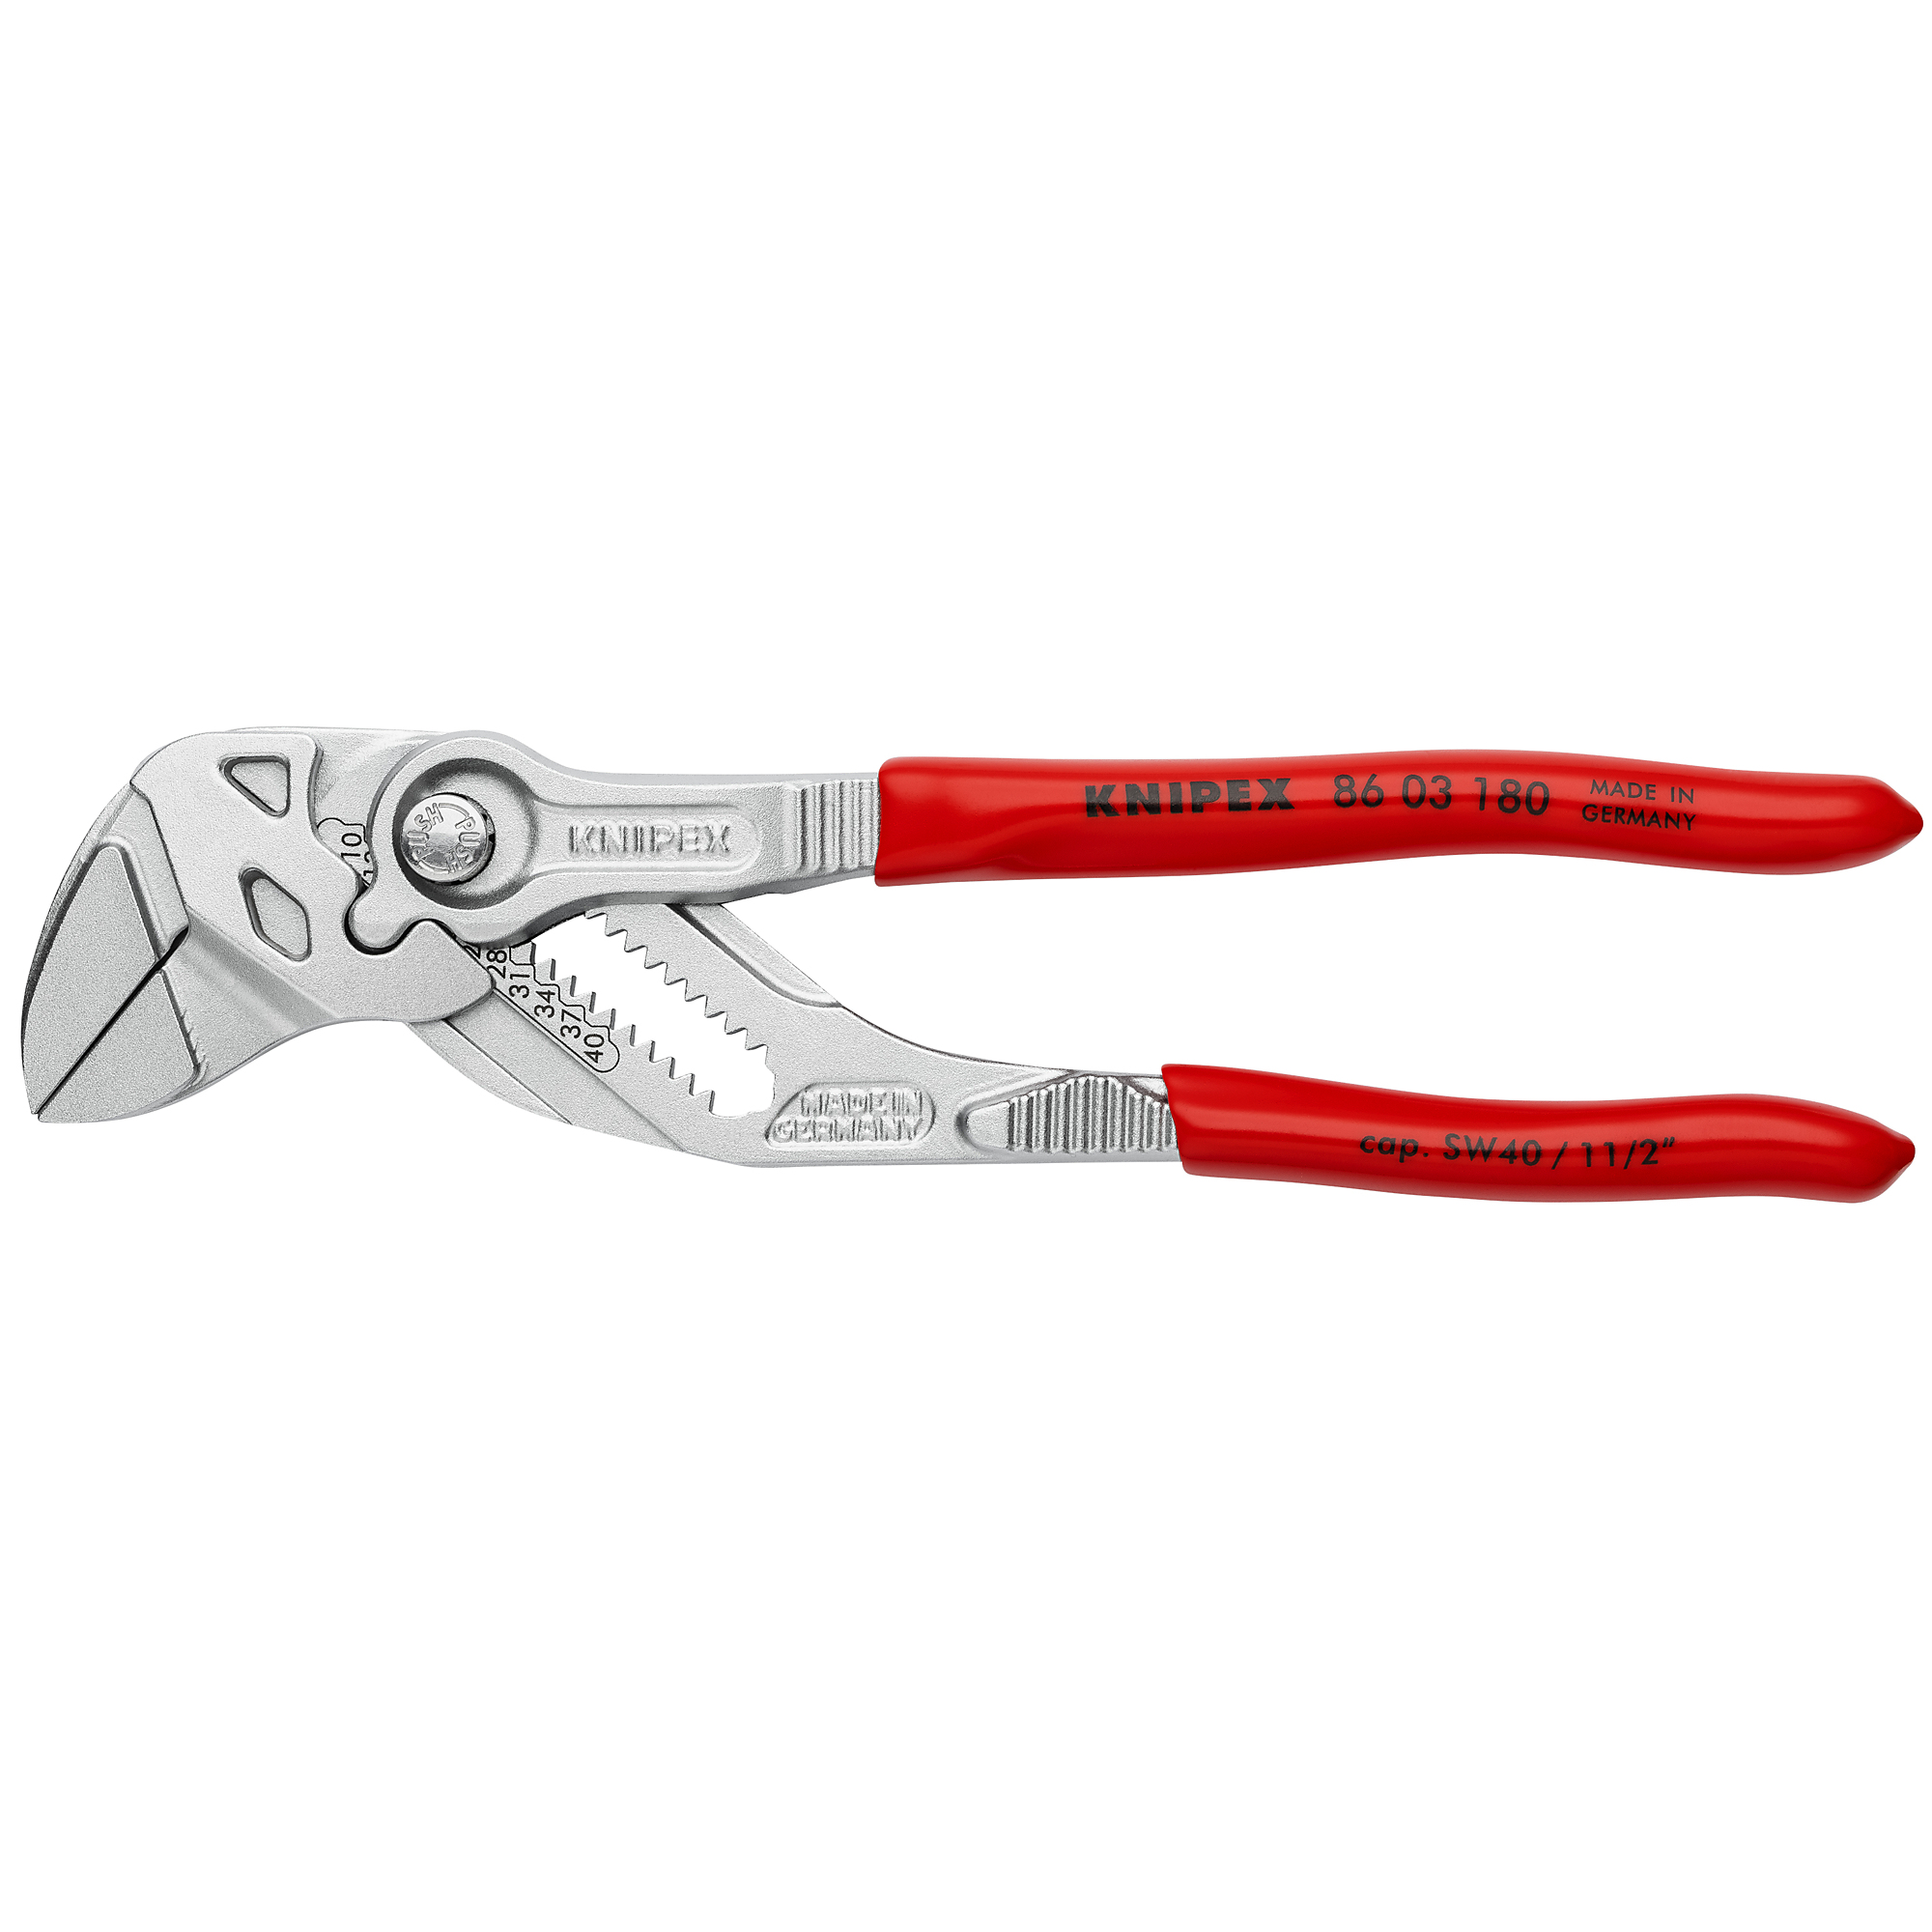 KNIPEX, Pliers Wrench, Plastic coating, 7.25Inch, Pieces (qty.) 1 Material Steel, Jaw Capacity 1.5 in, Model 86 03 180 SBA